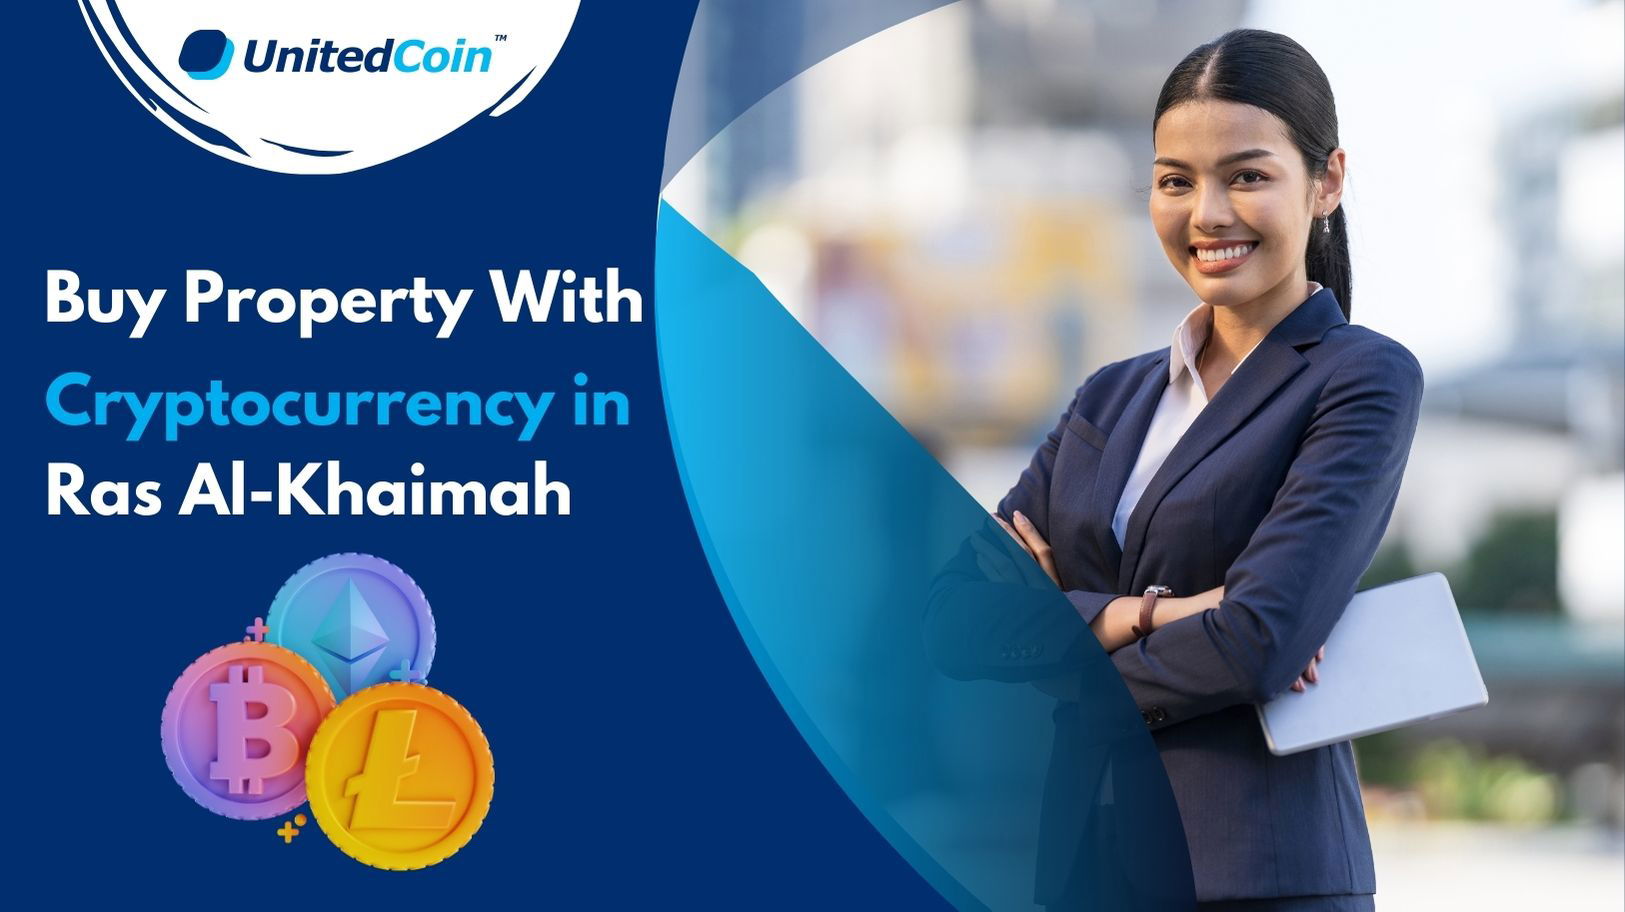 Buy Property With Cryptocurrency in Ras Al-Khaimah